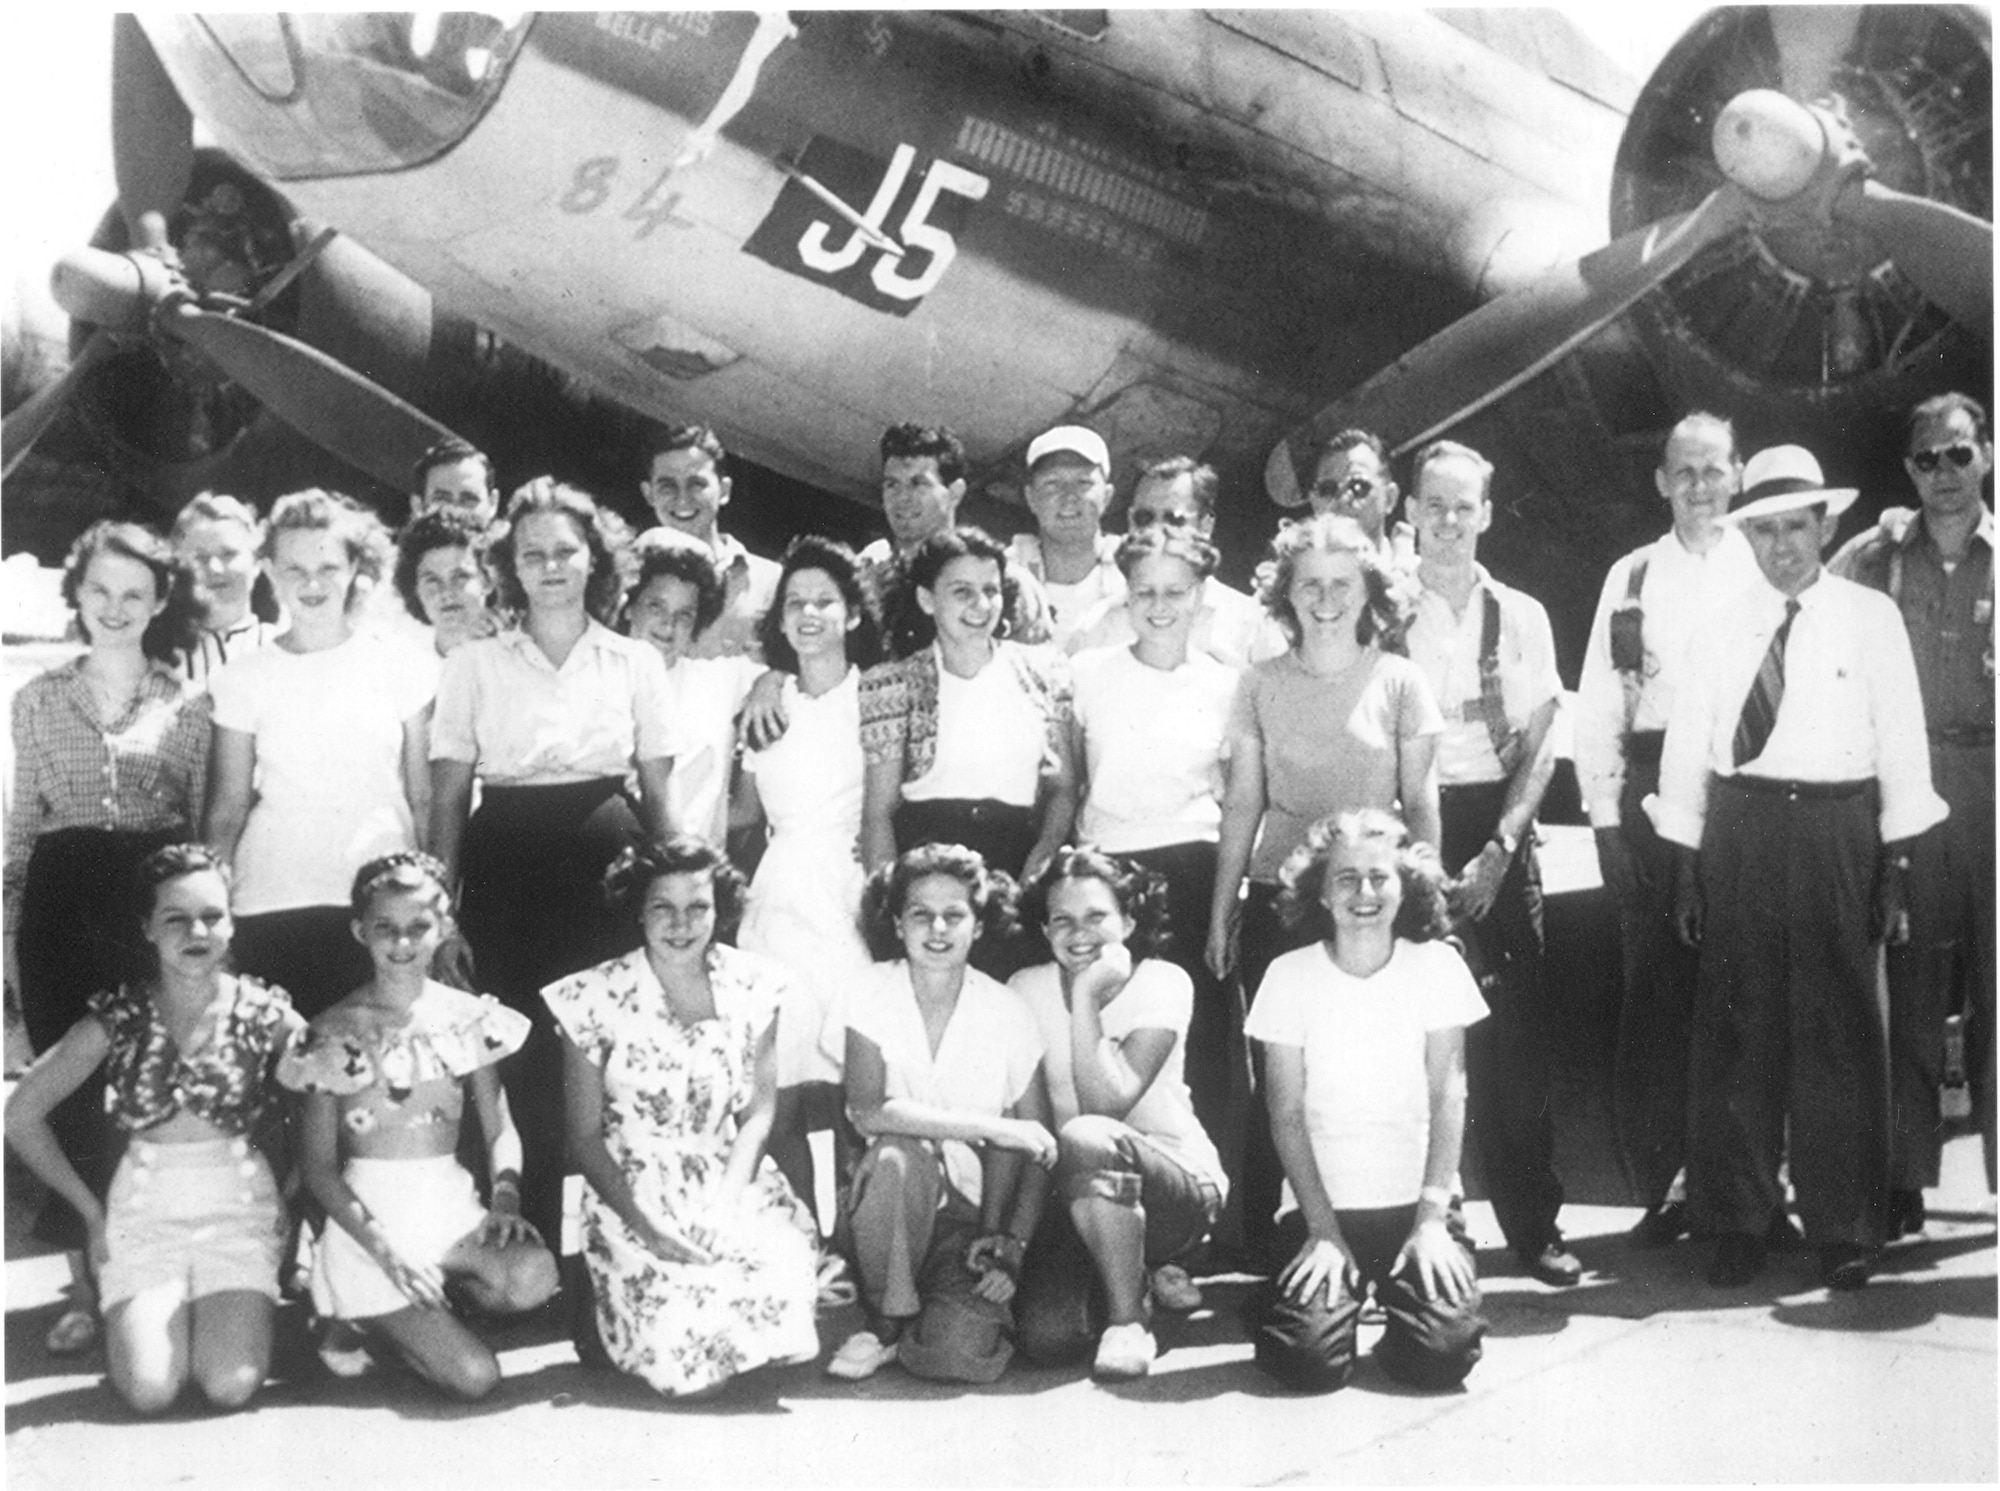 Students from Altus schools pose with the Memphis Belle, in 1946 at Altus Army Air Field. The famous World War II bomber was stored in Altus AAF briefly after the war. Altus Air Force Base began as a twin engine training base in World War II and since then has supported many air mobility, missile, and training missions as well as routinely deployed Airmen and aircraft overseas and to humanitarian missions. (Courtesy Photo)